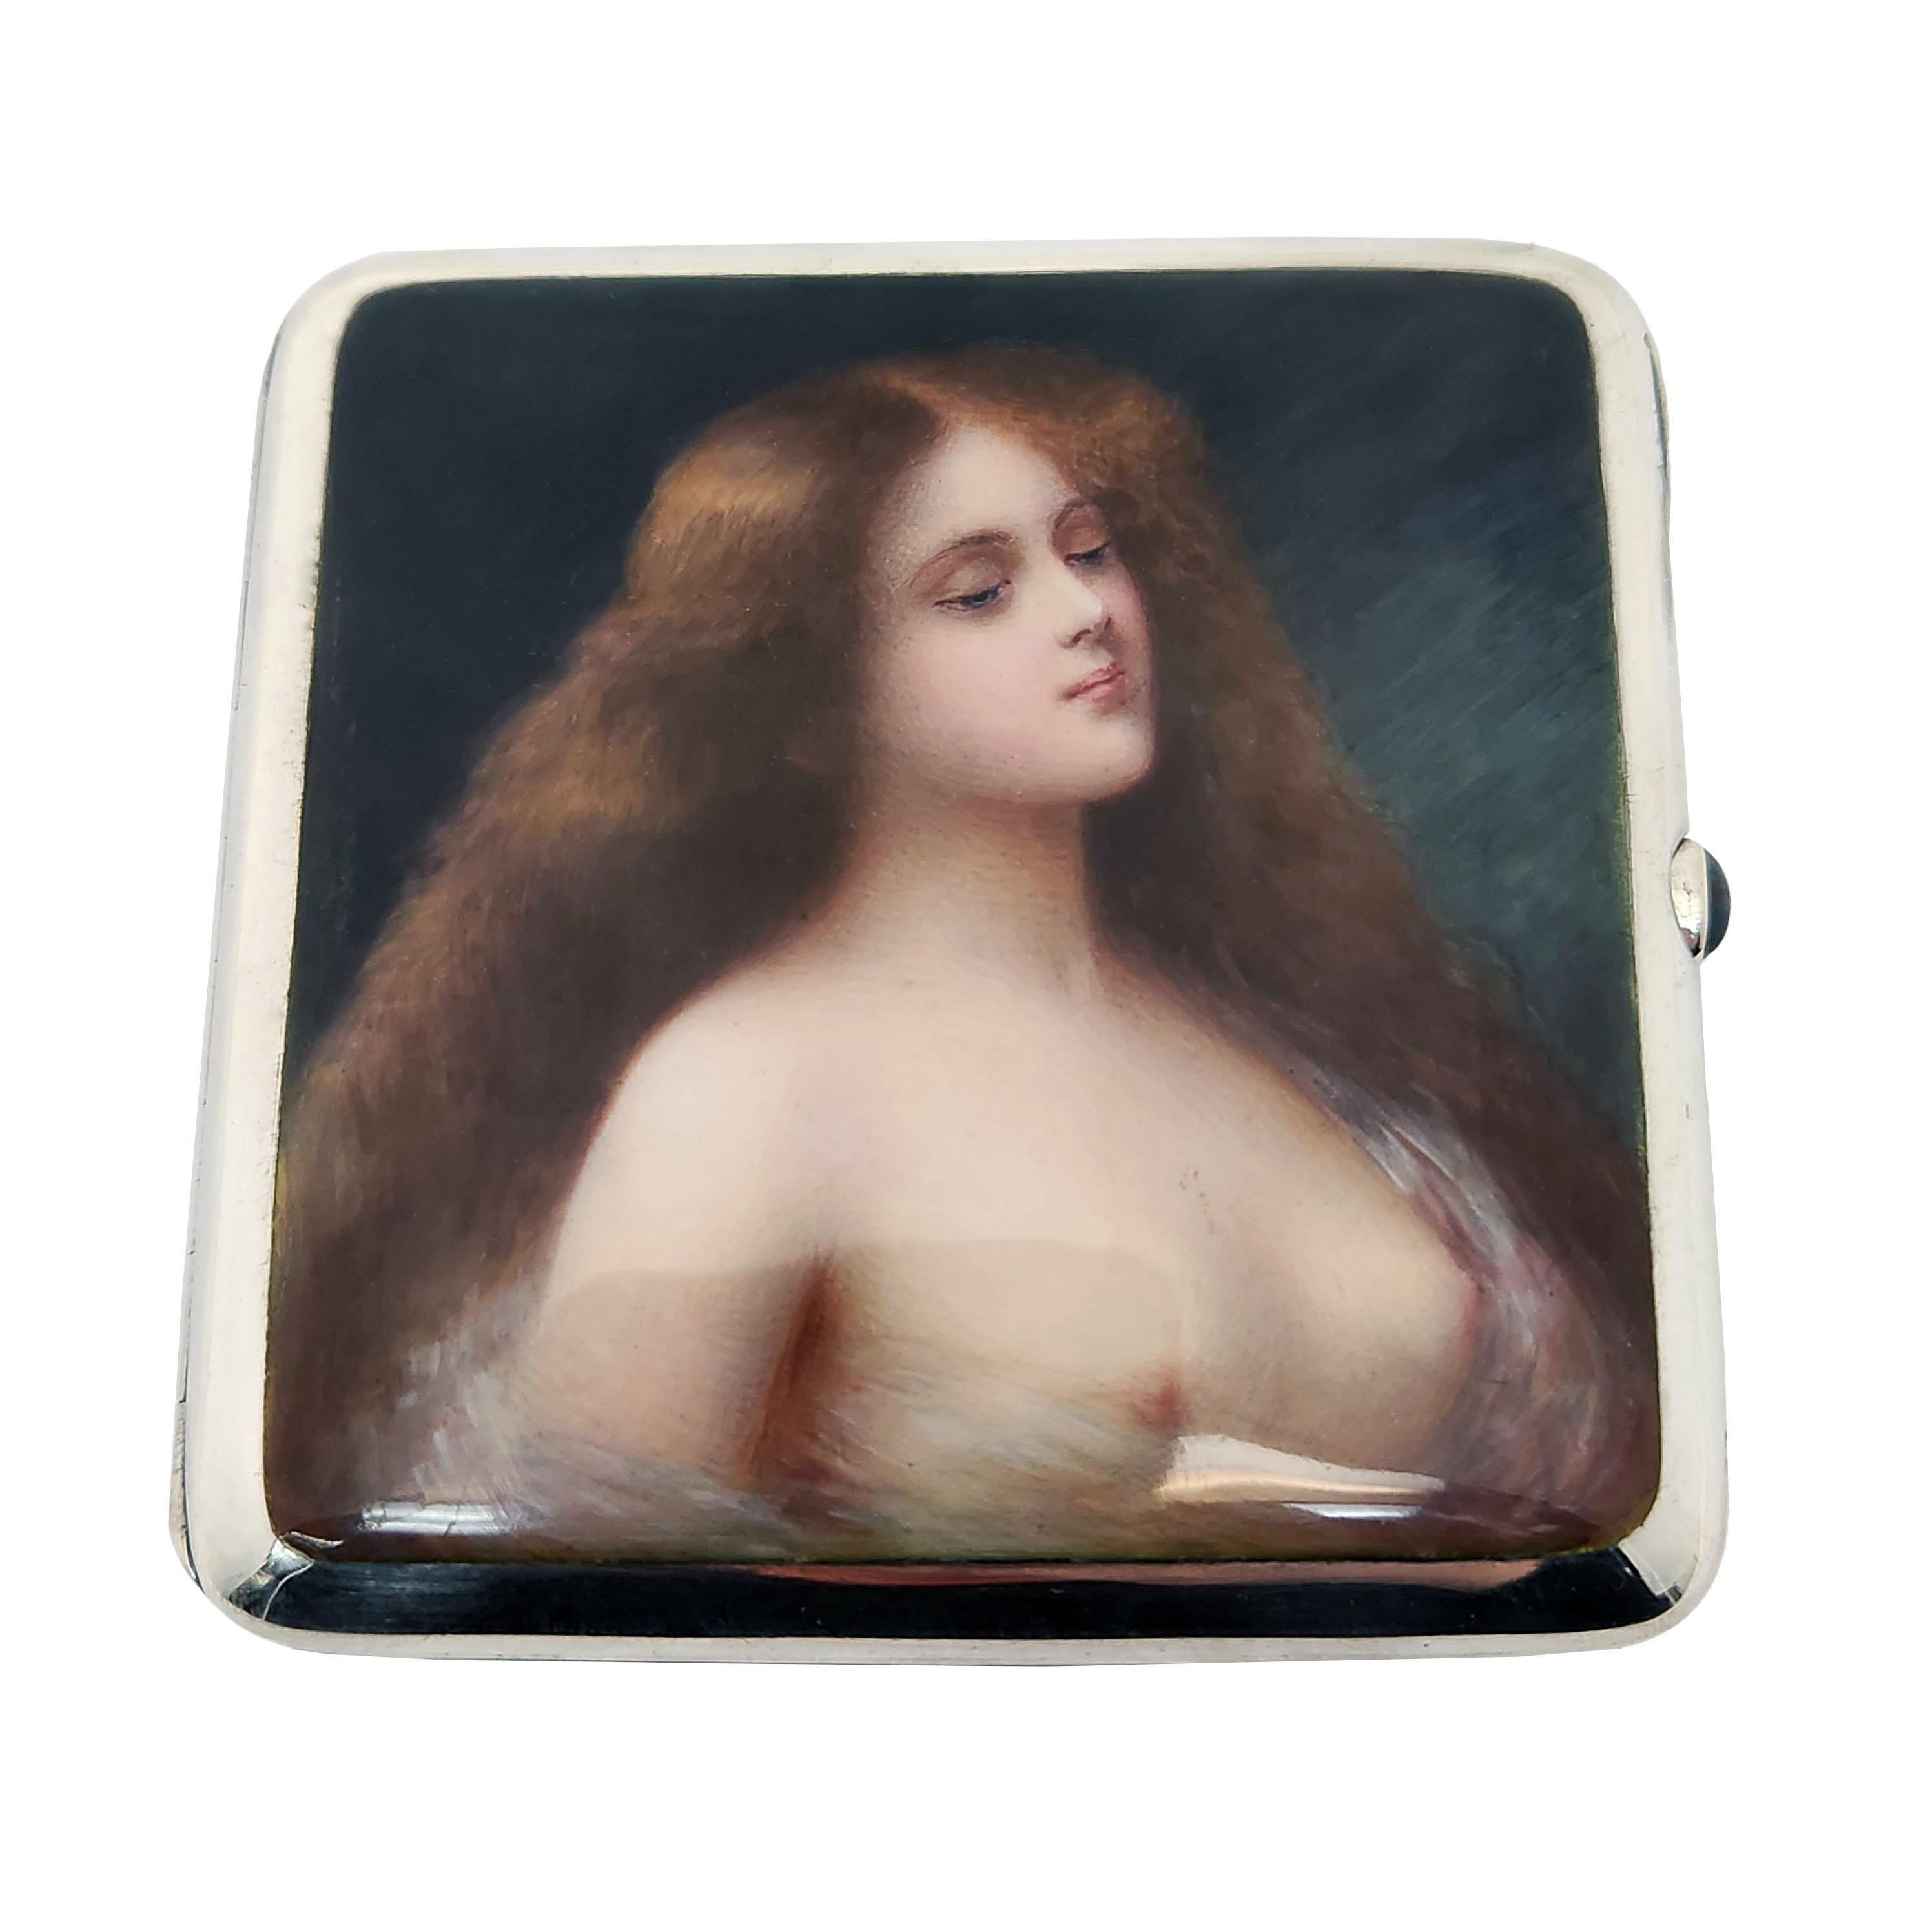 A lovely Antique German Silver & Enamel Erotic Cigarette Case with a beautiful Enamel Image of a Woman on the front cover. This Image is rendered in rich, deep colour with an impressive attention to detail. The Case has a blue cabochon stone inset